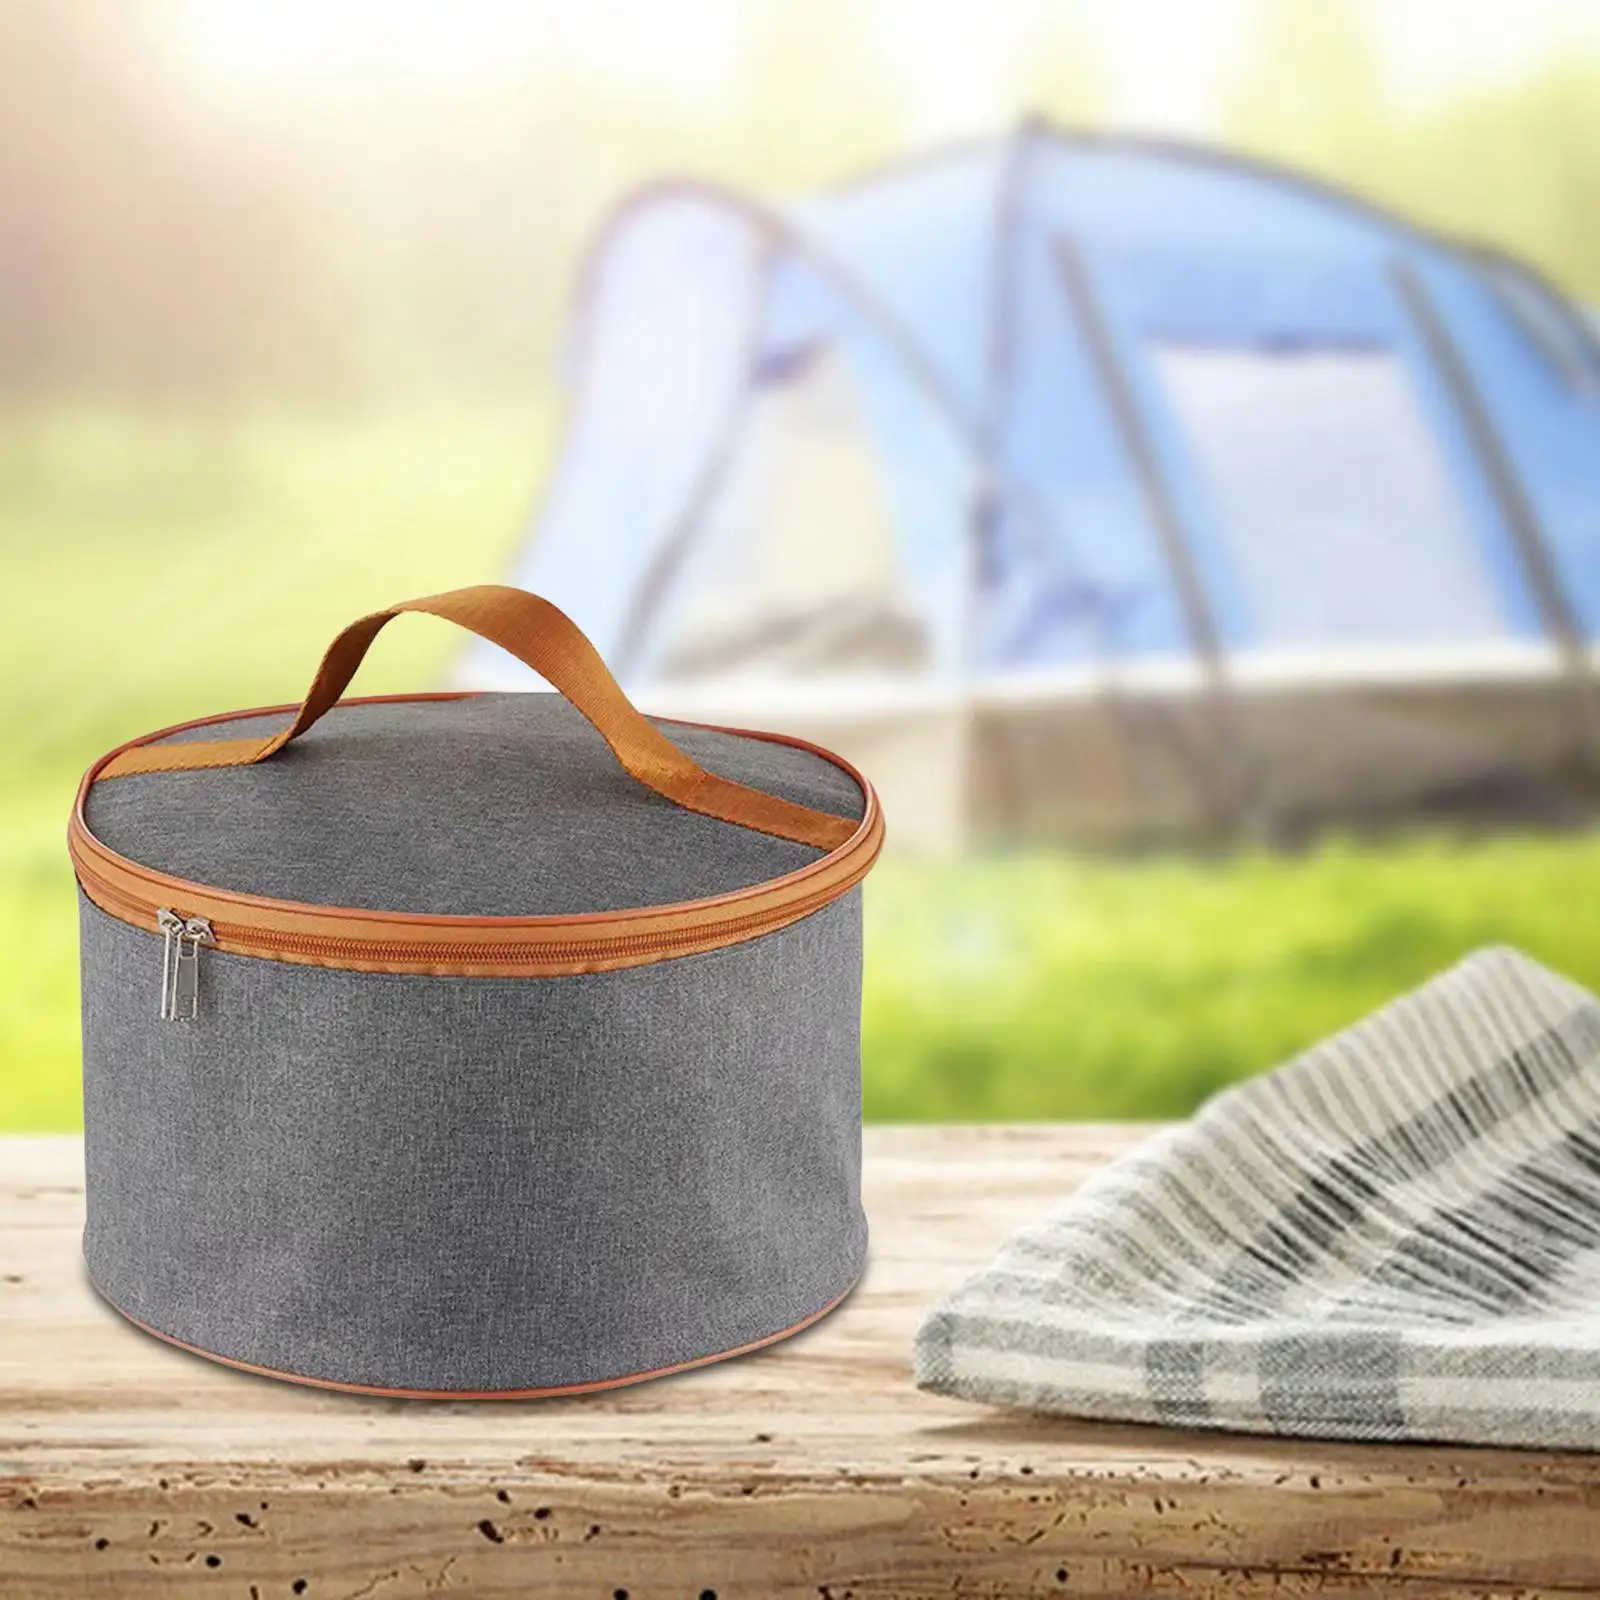 Camping Cookware Carry Bag Large Capacity Oxford Cloth Camping Storage Bag for Backpacking Picnic Outdoor Sports Travel Hiking